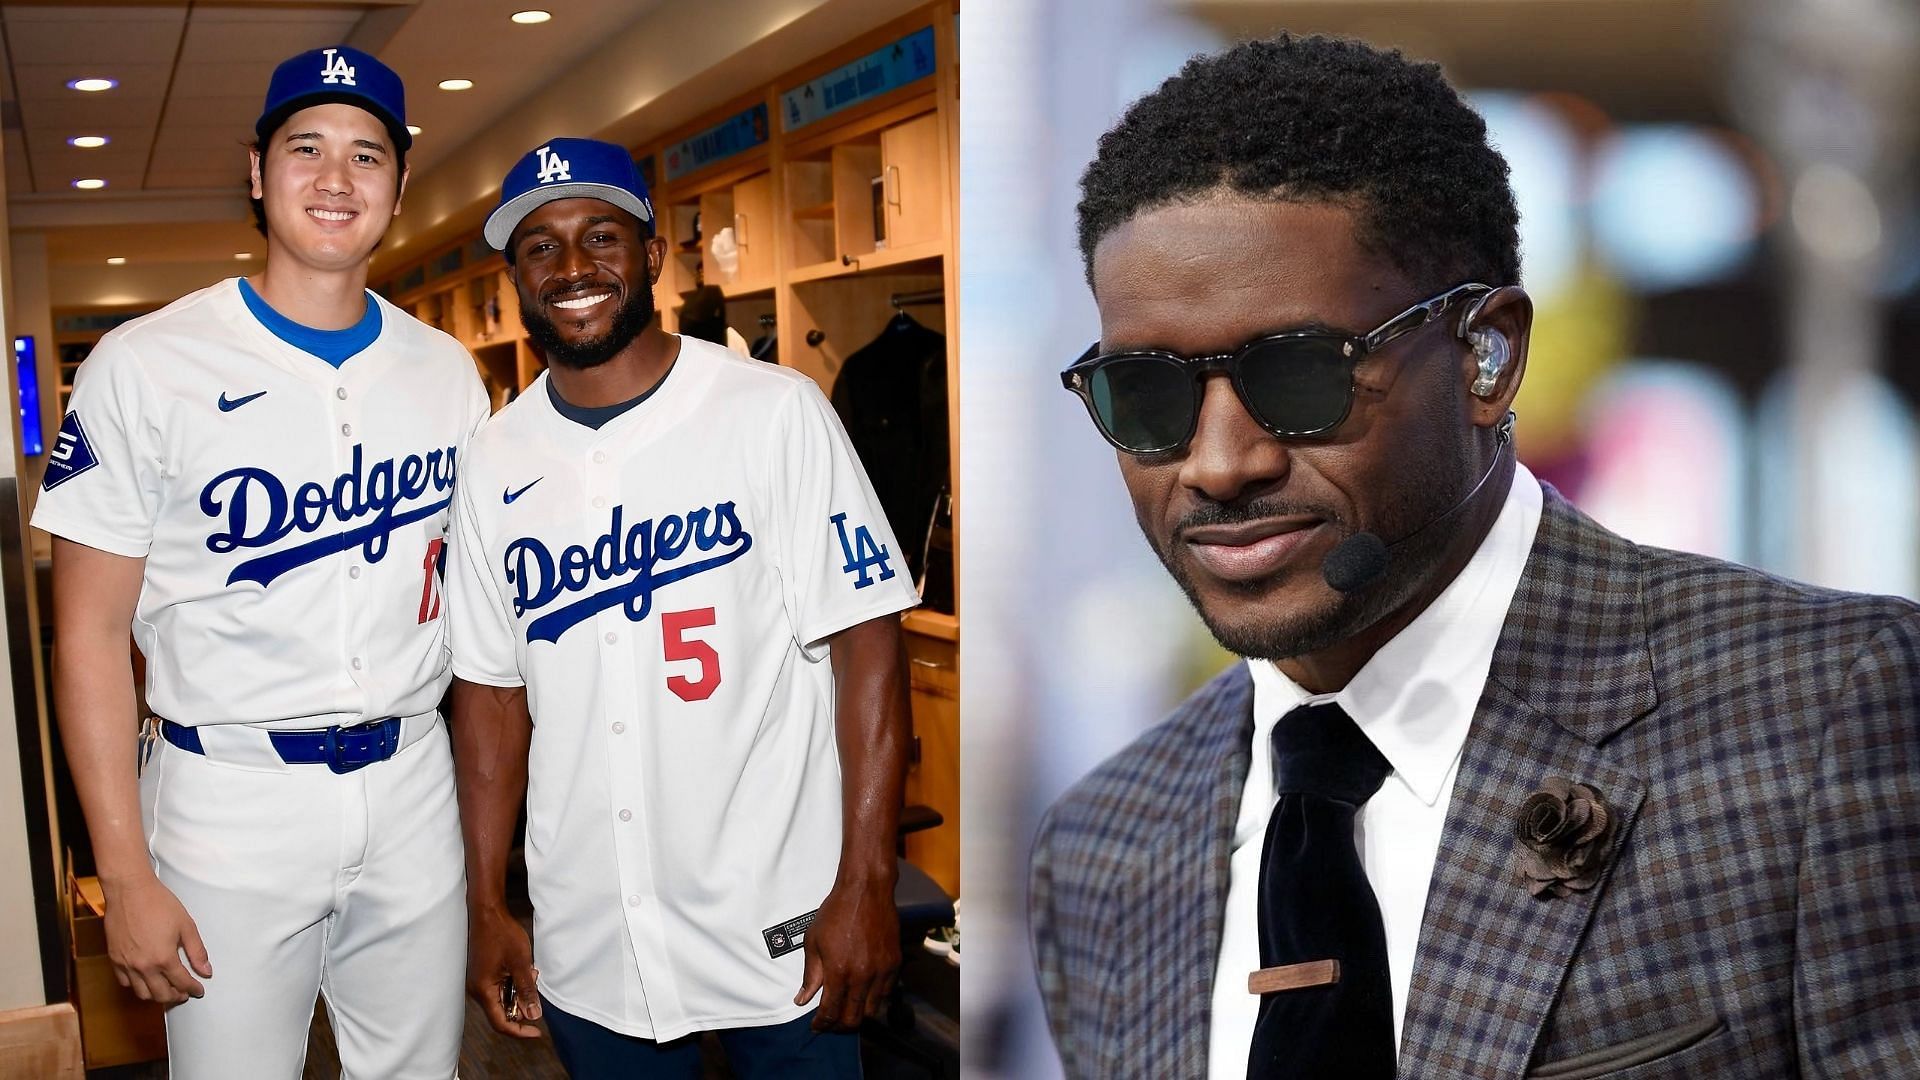 Reggie Bush threw the first pitch at the Los Angeles Dodgers game last night 